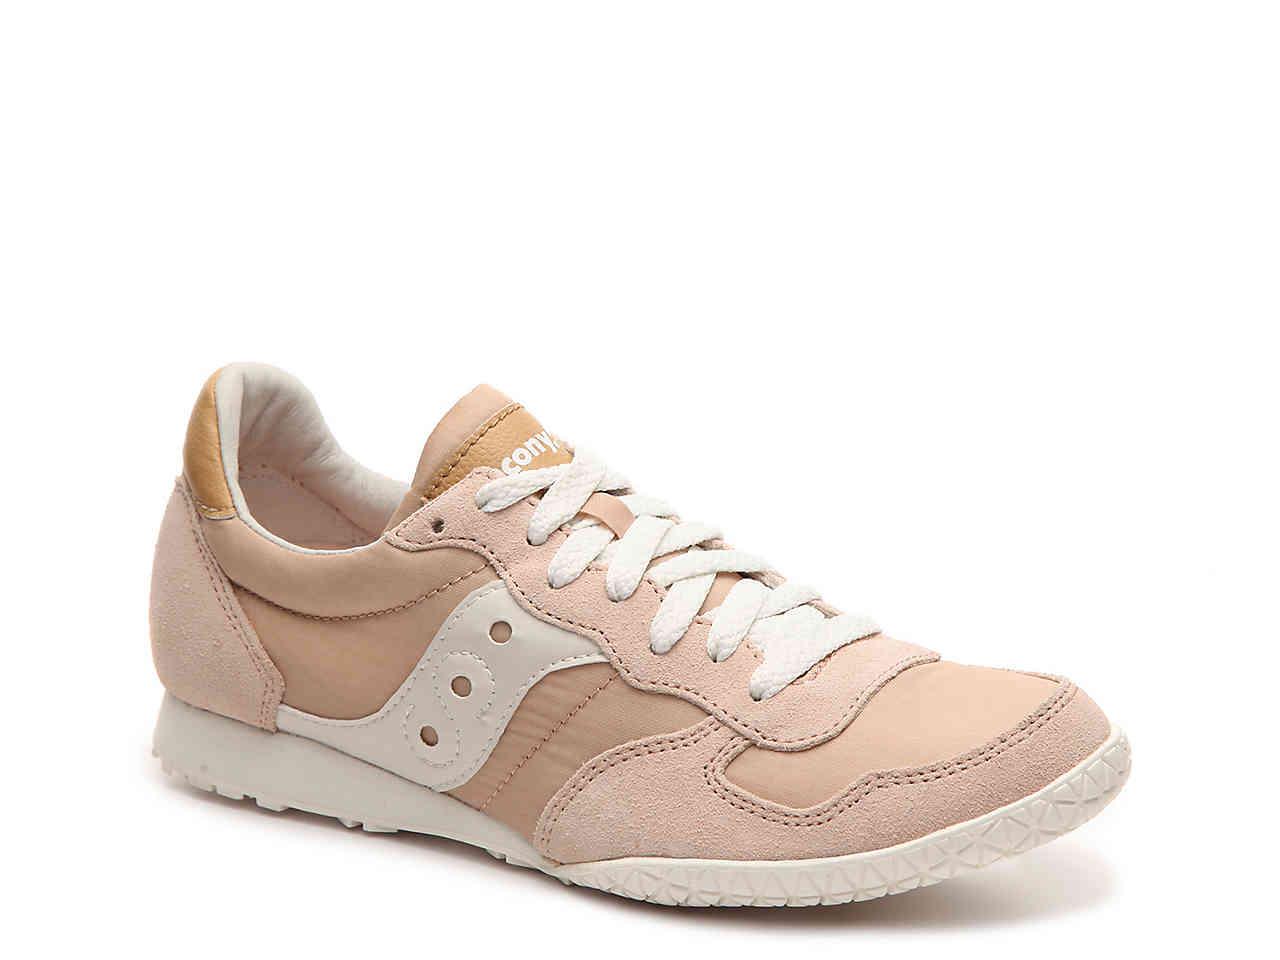 Synthetic Bullet Sneaker in Blush (Pink 